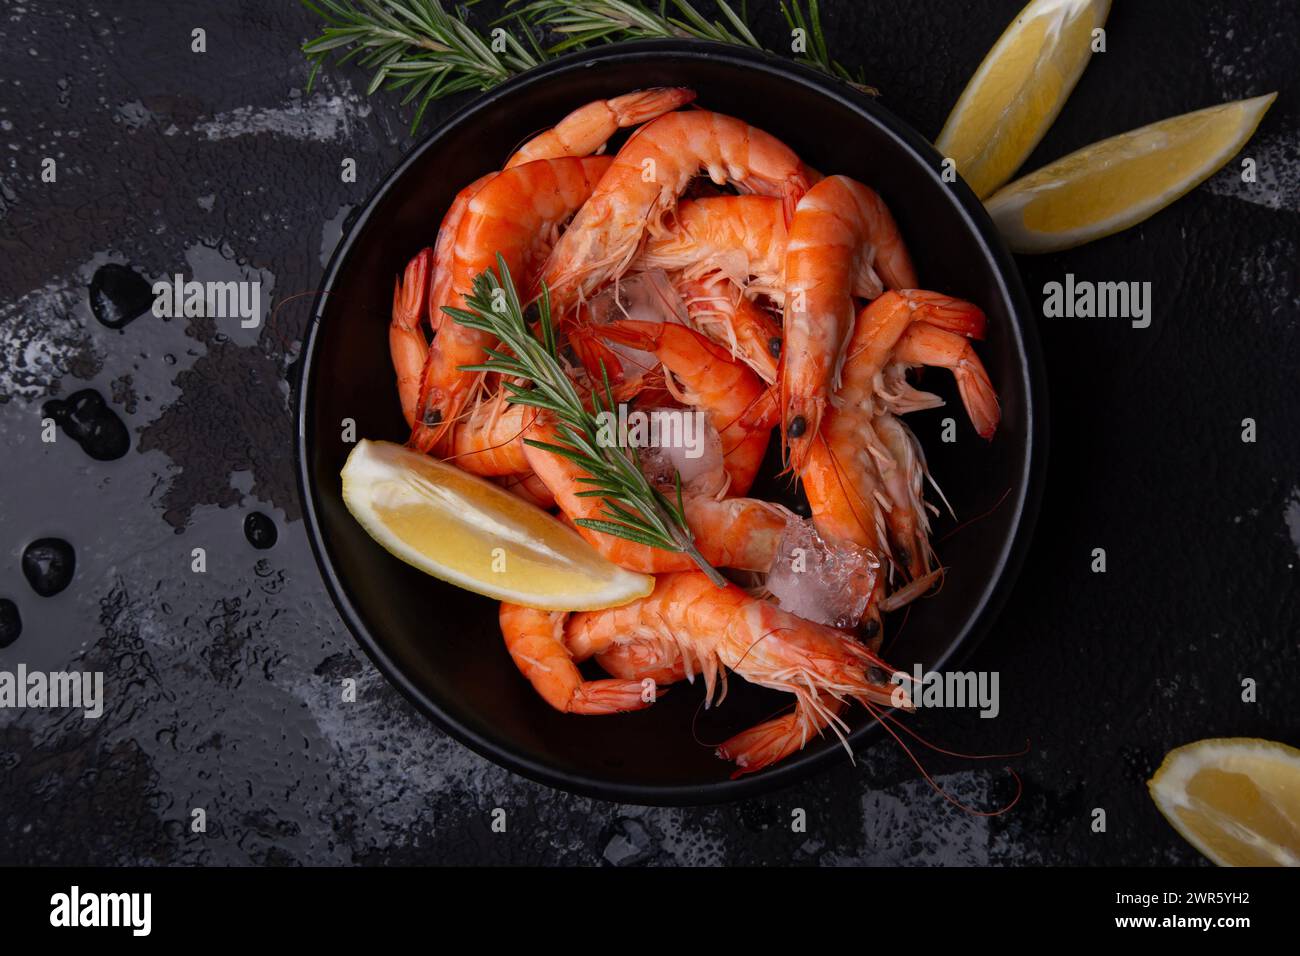 Chilled seafood succulent prawns ready to be served, for restaurant menus or cooking class material. Stock Photo